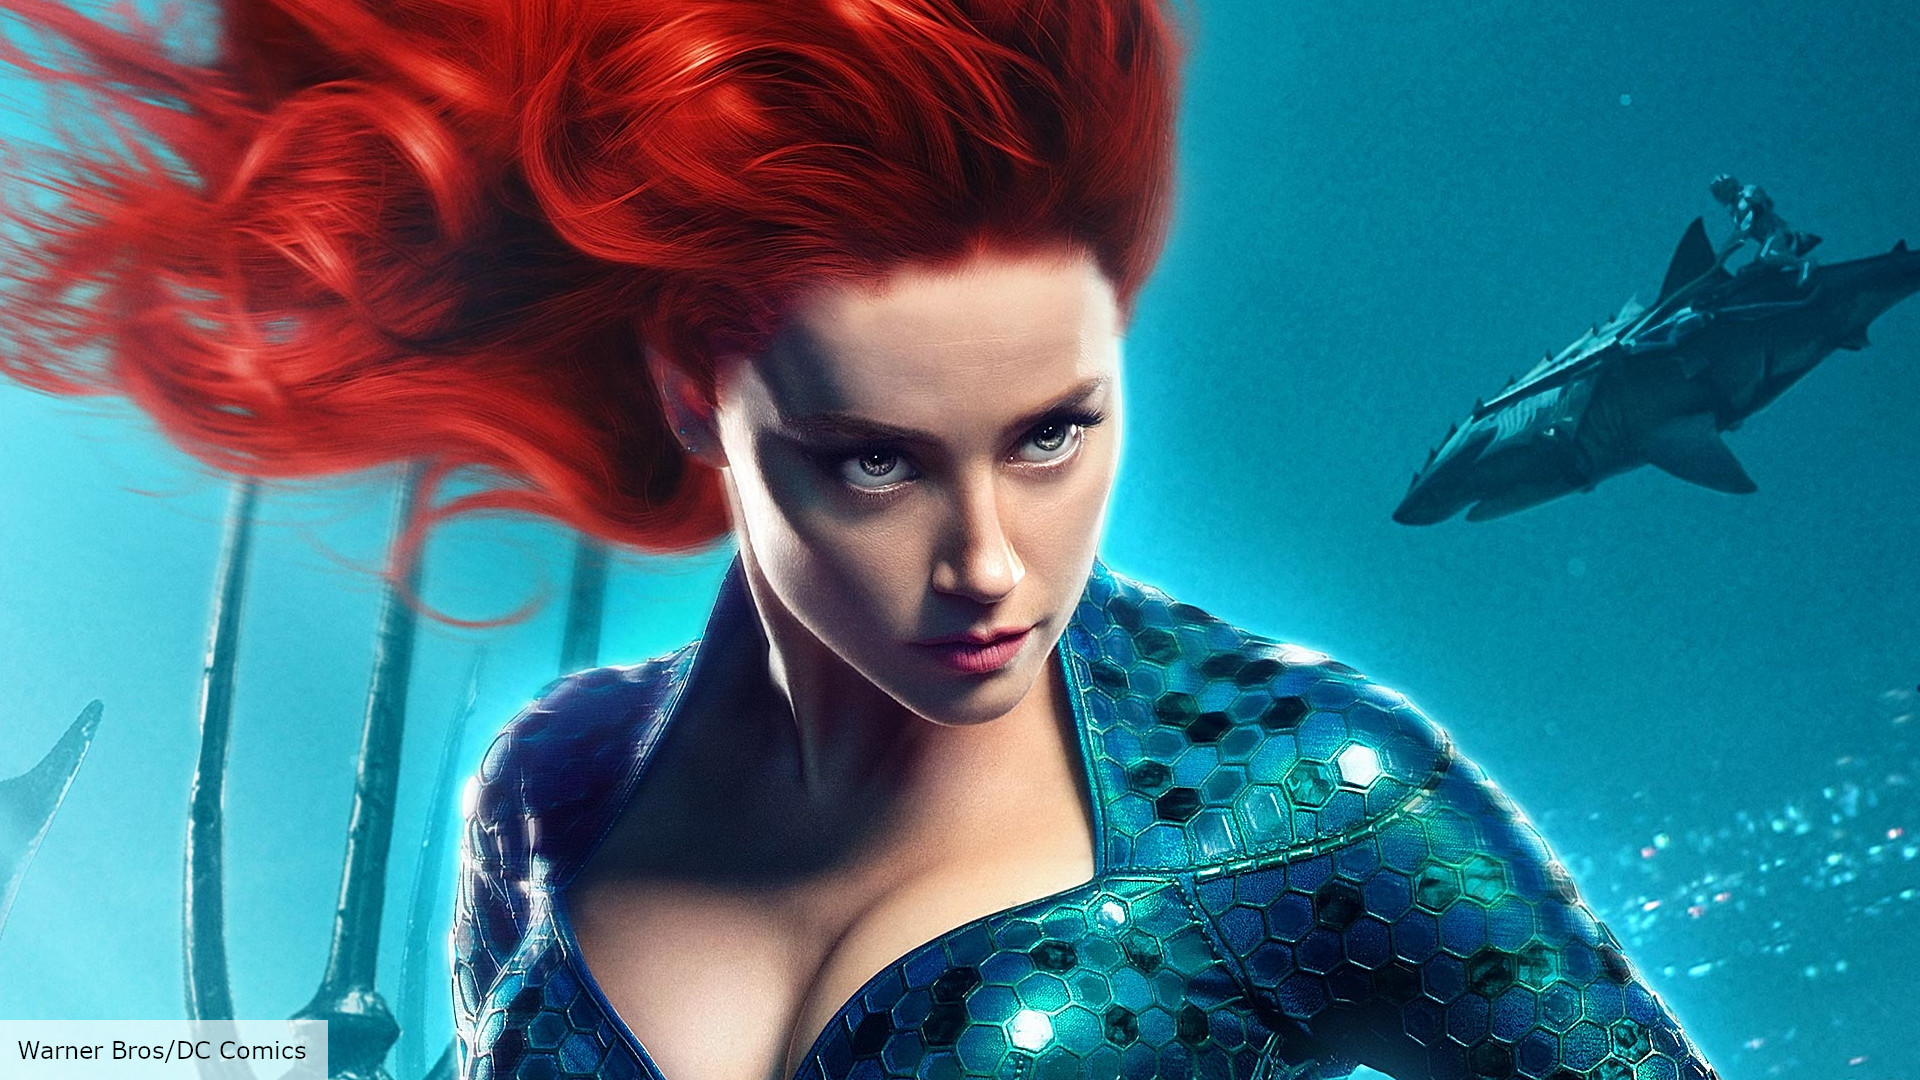 Amber Heard's Mera Will Have Blonde Hair in Aquaman 2 - wide 3